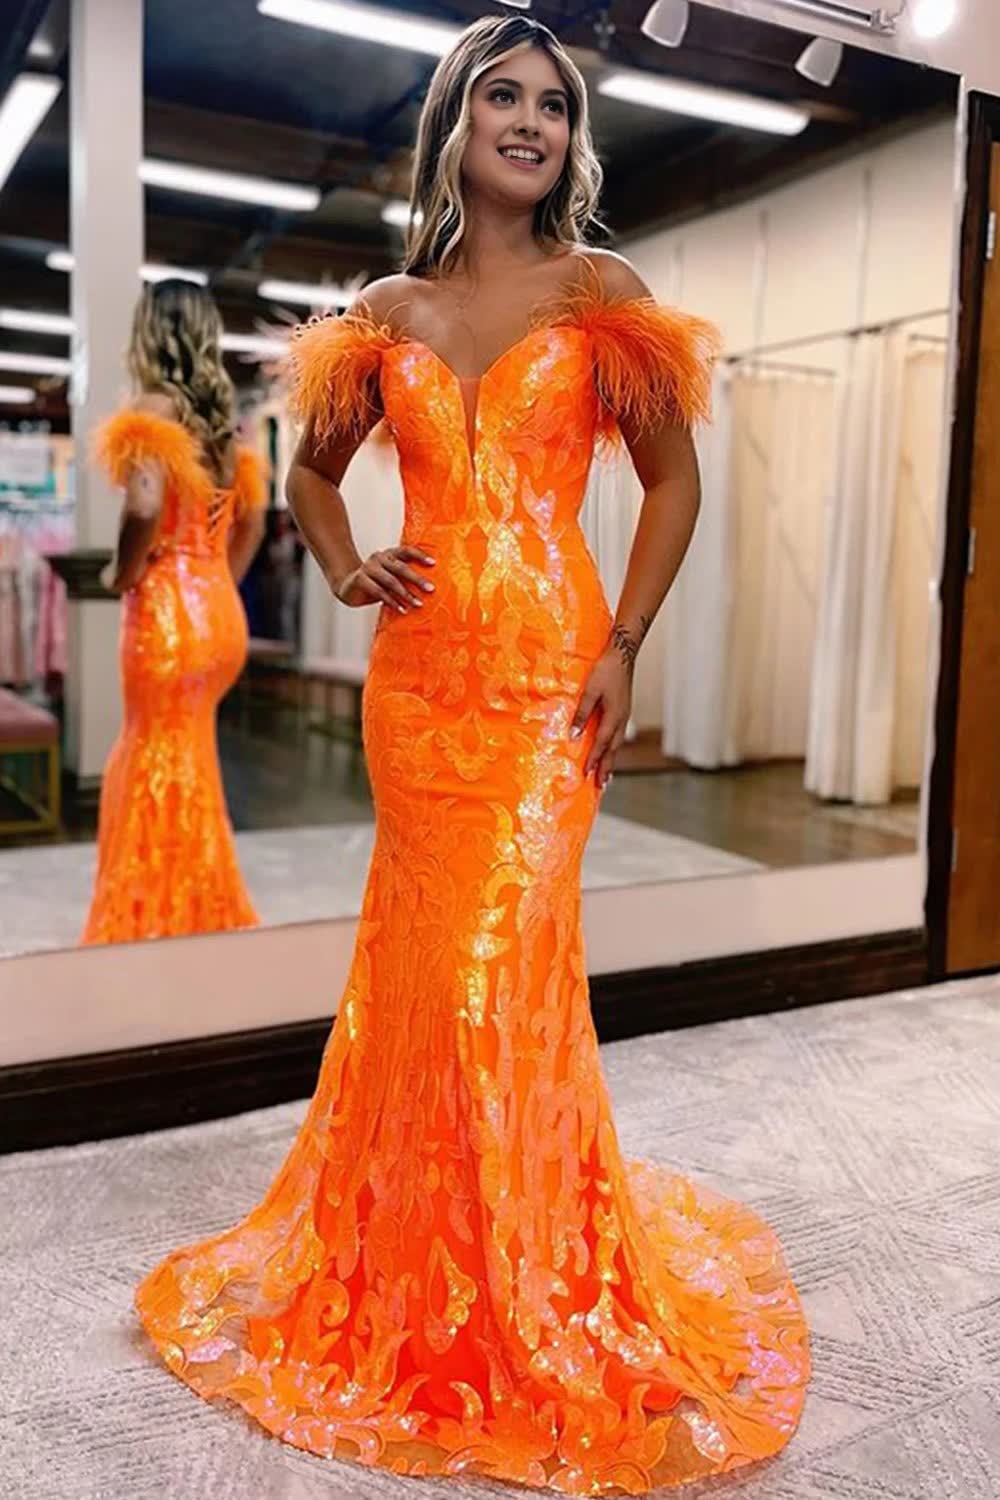 Sparkly Orange Sequins Off the Shoulder Mermaid Long Corset Prom Dress with Feathers outfit, Sparkly Orange Sequins Off the Shoulder Mermaid Long Prom Dress with Feathers